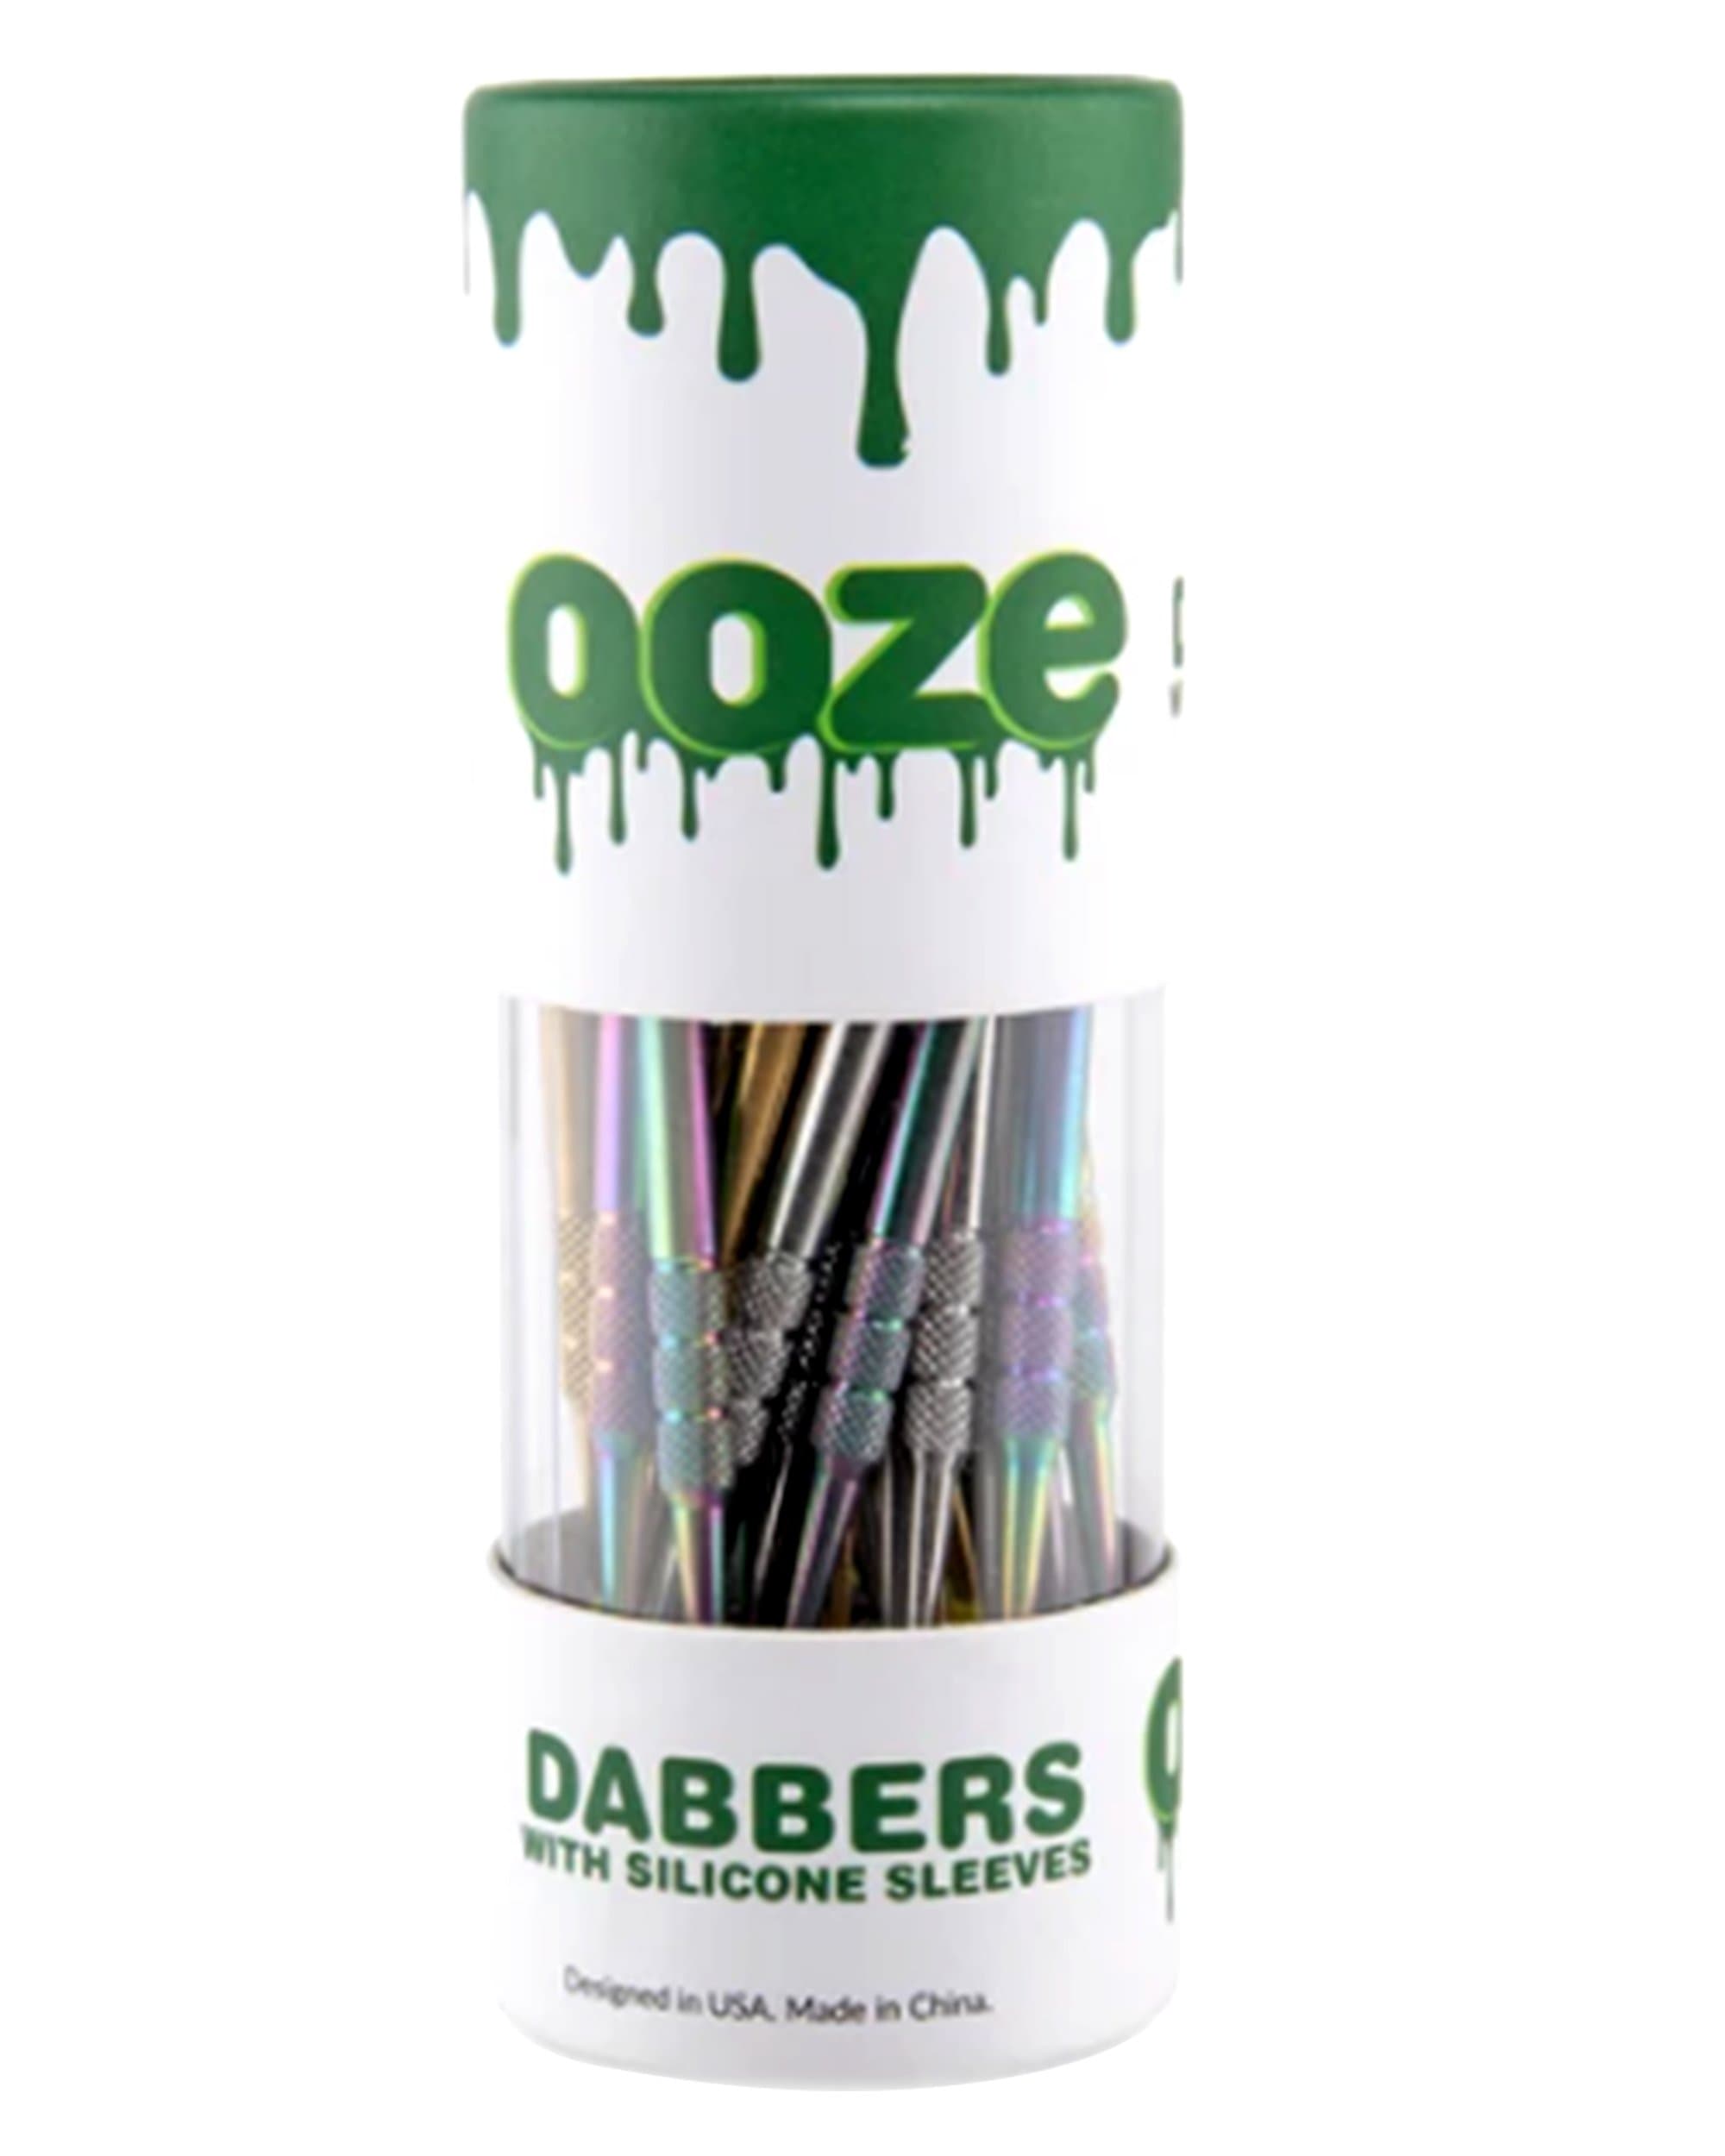 ooze dabbers silicone sleeve box